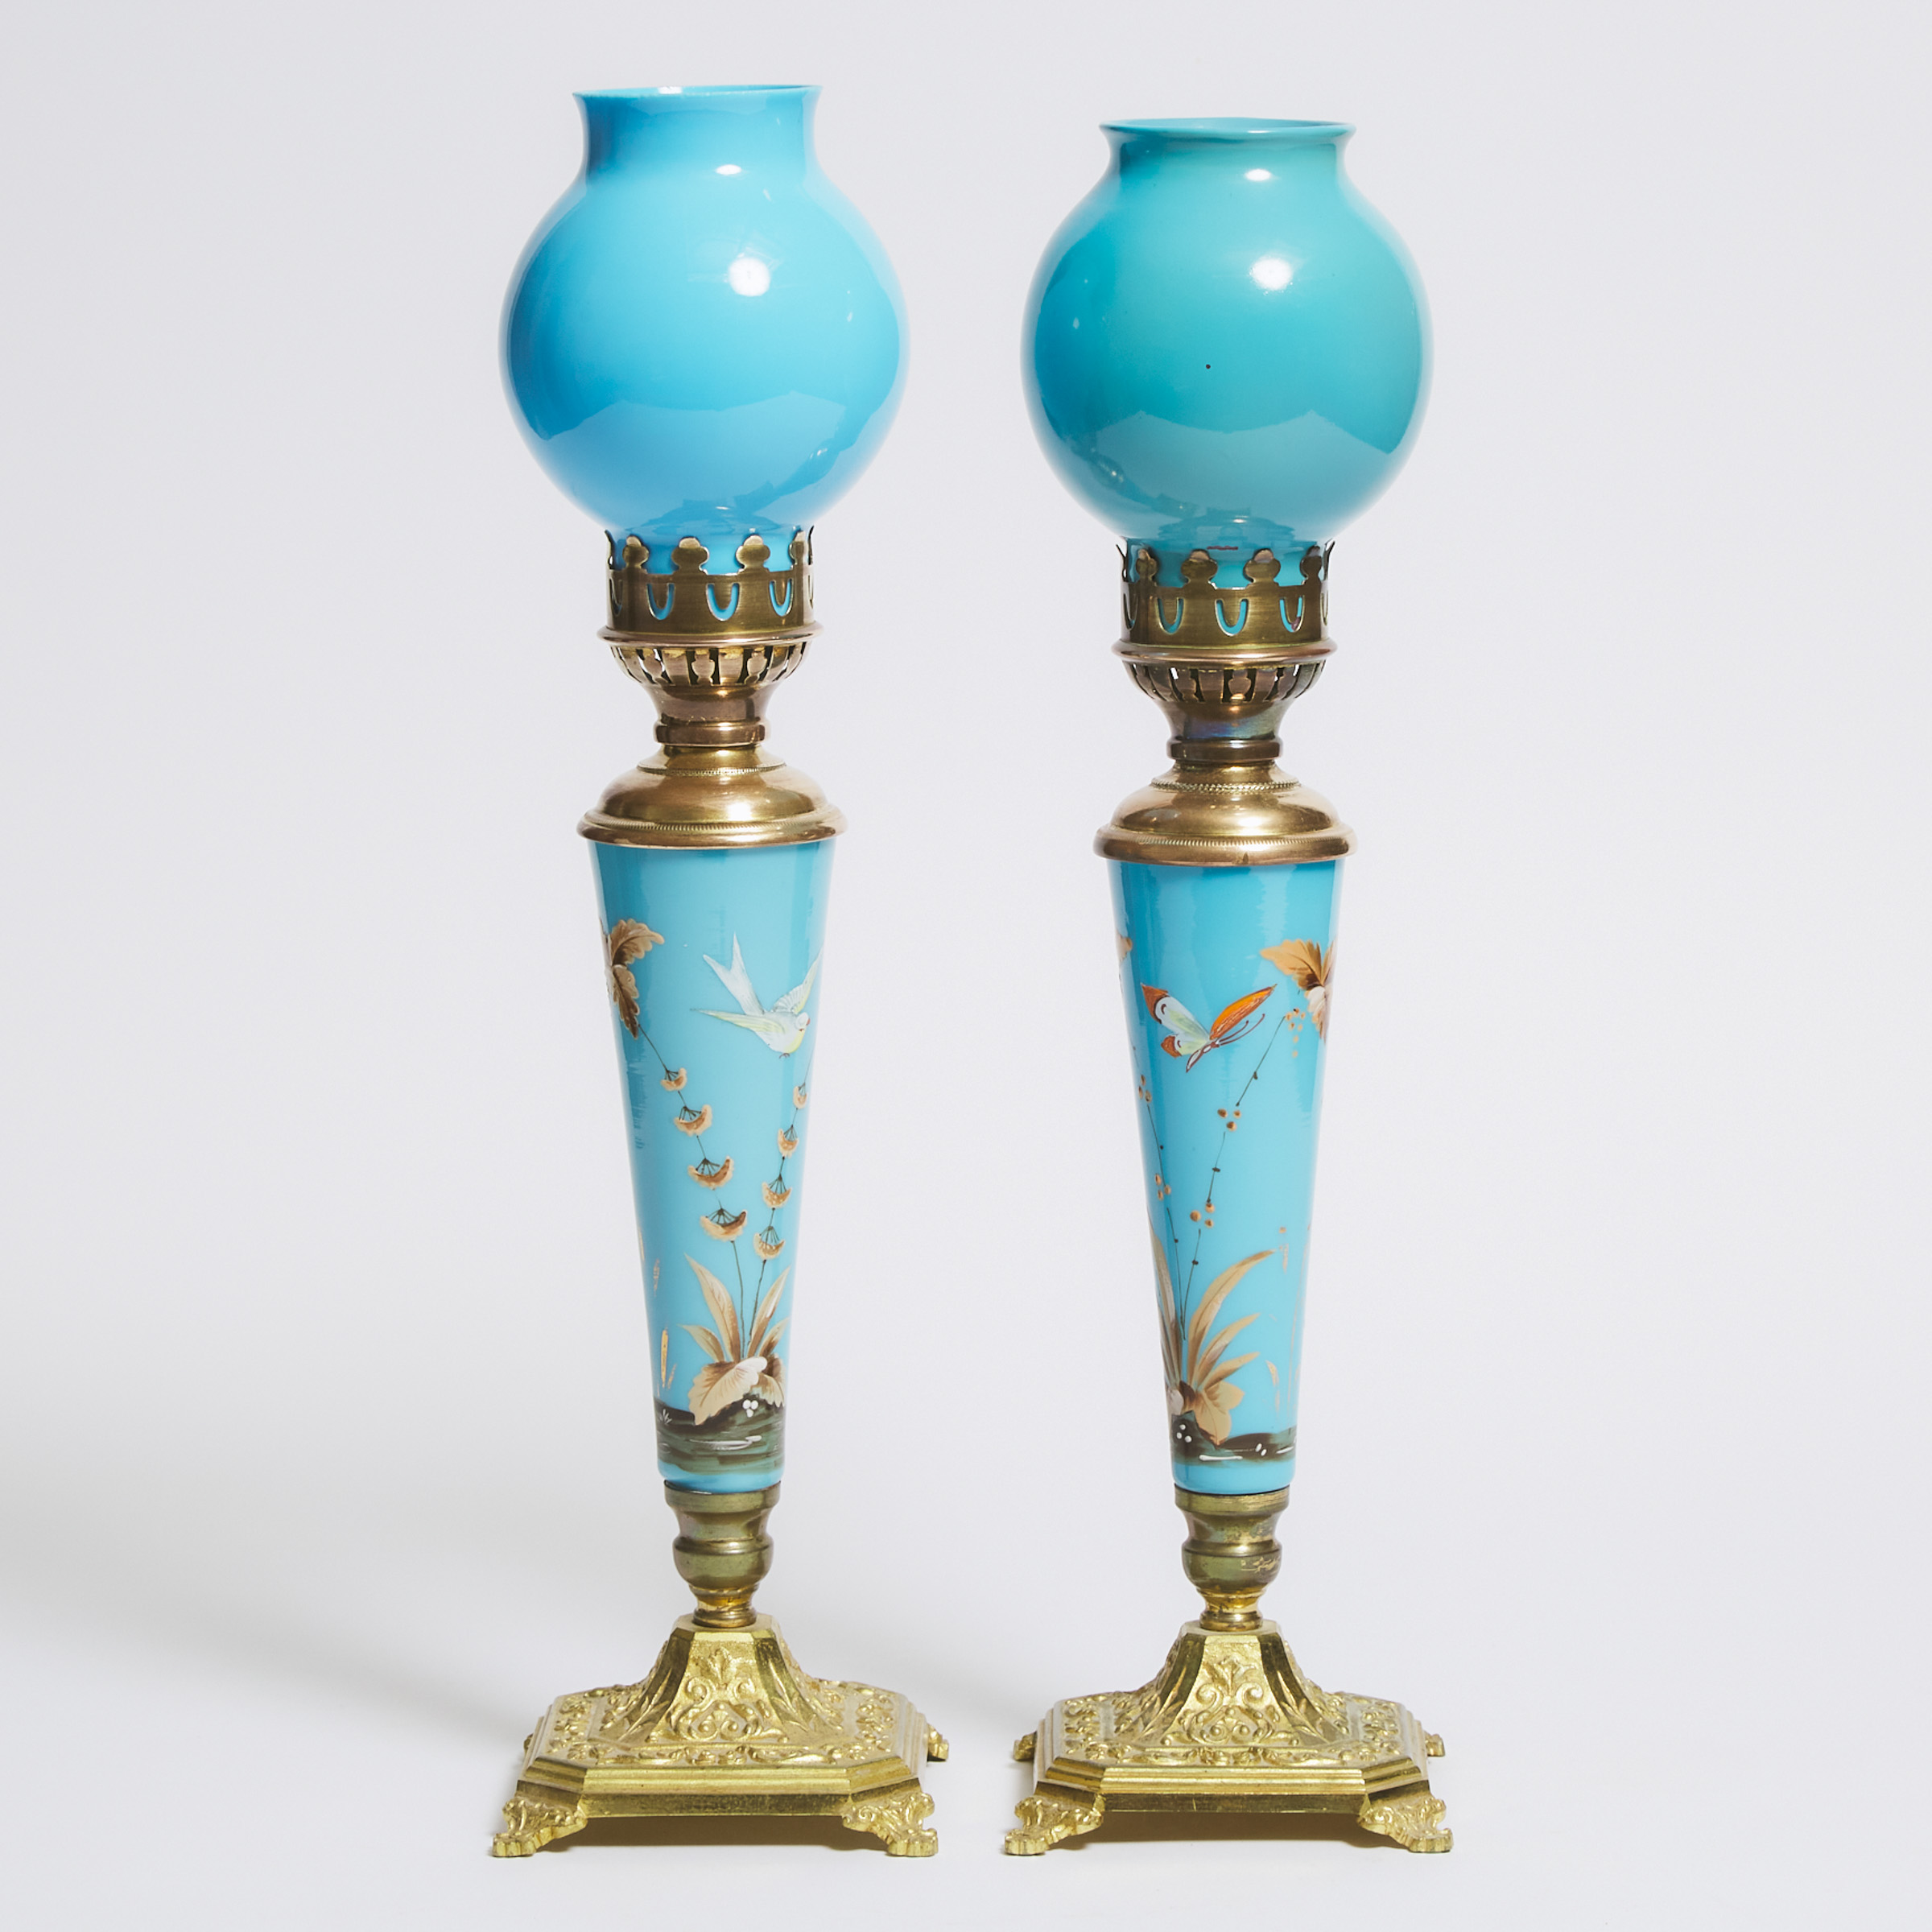 Pair of Victorian Aesthetic Movement Banquet Table Lamps, c.1870 